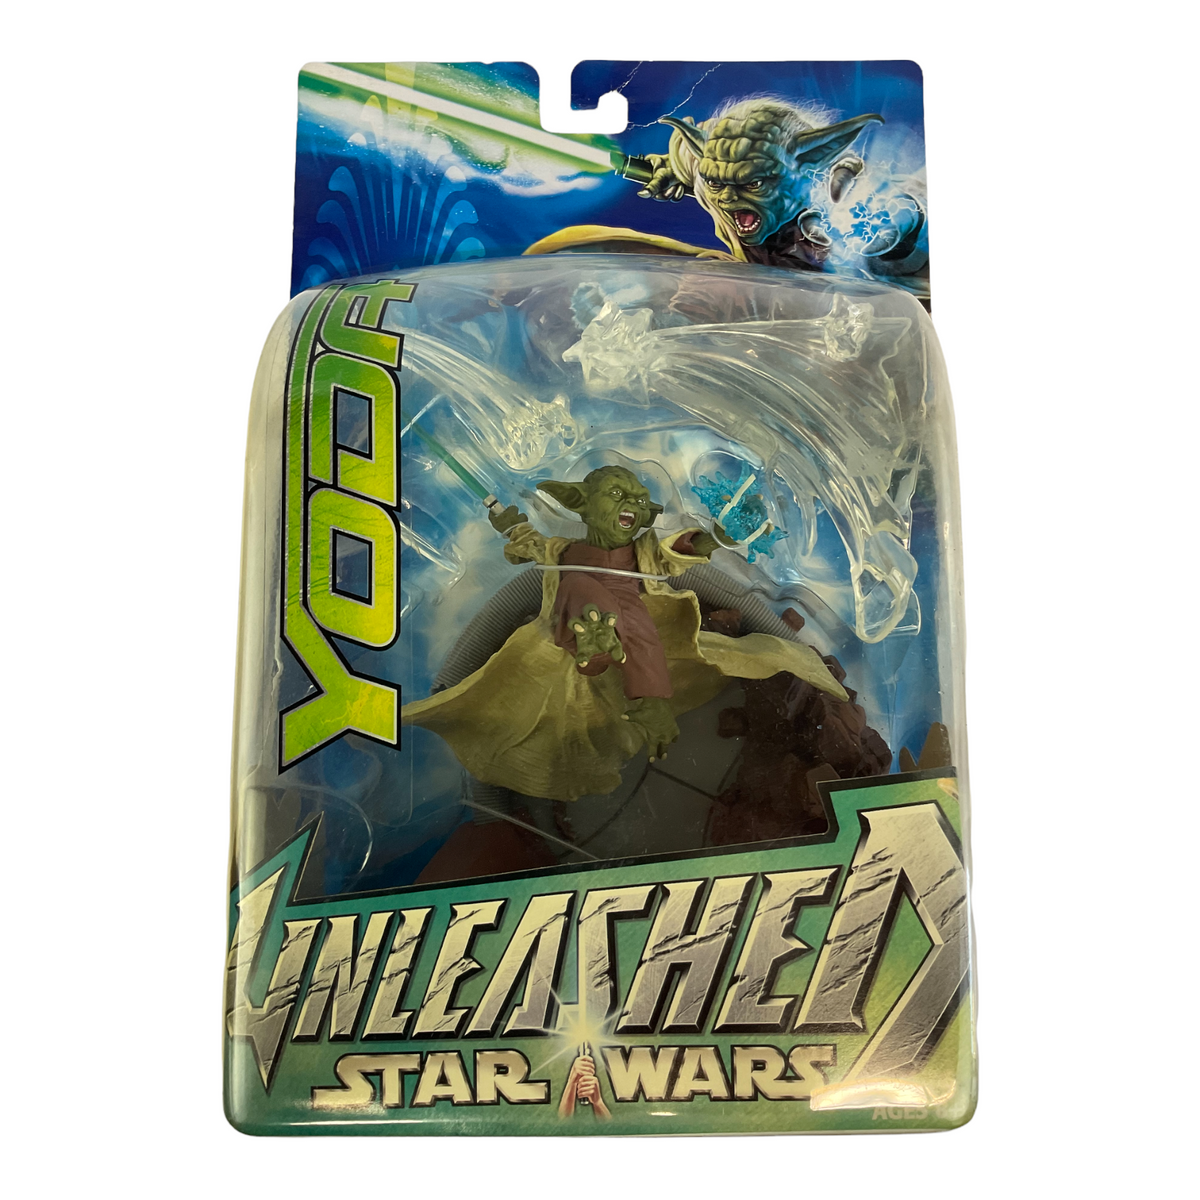 Star Wars Year 2003 Unleashed 3 Inch Tall Action Figure - Yoda with Lightsaber and Diorama Display Base